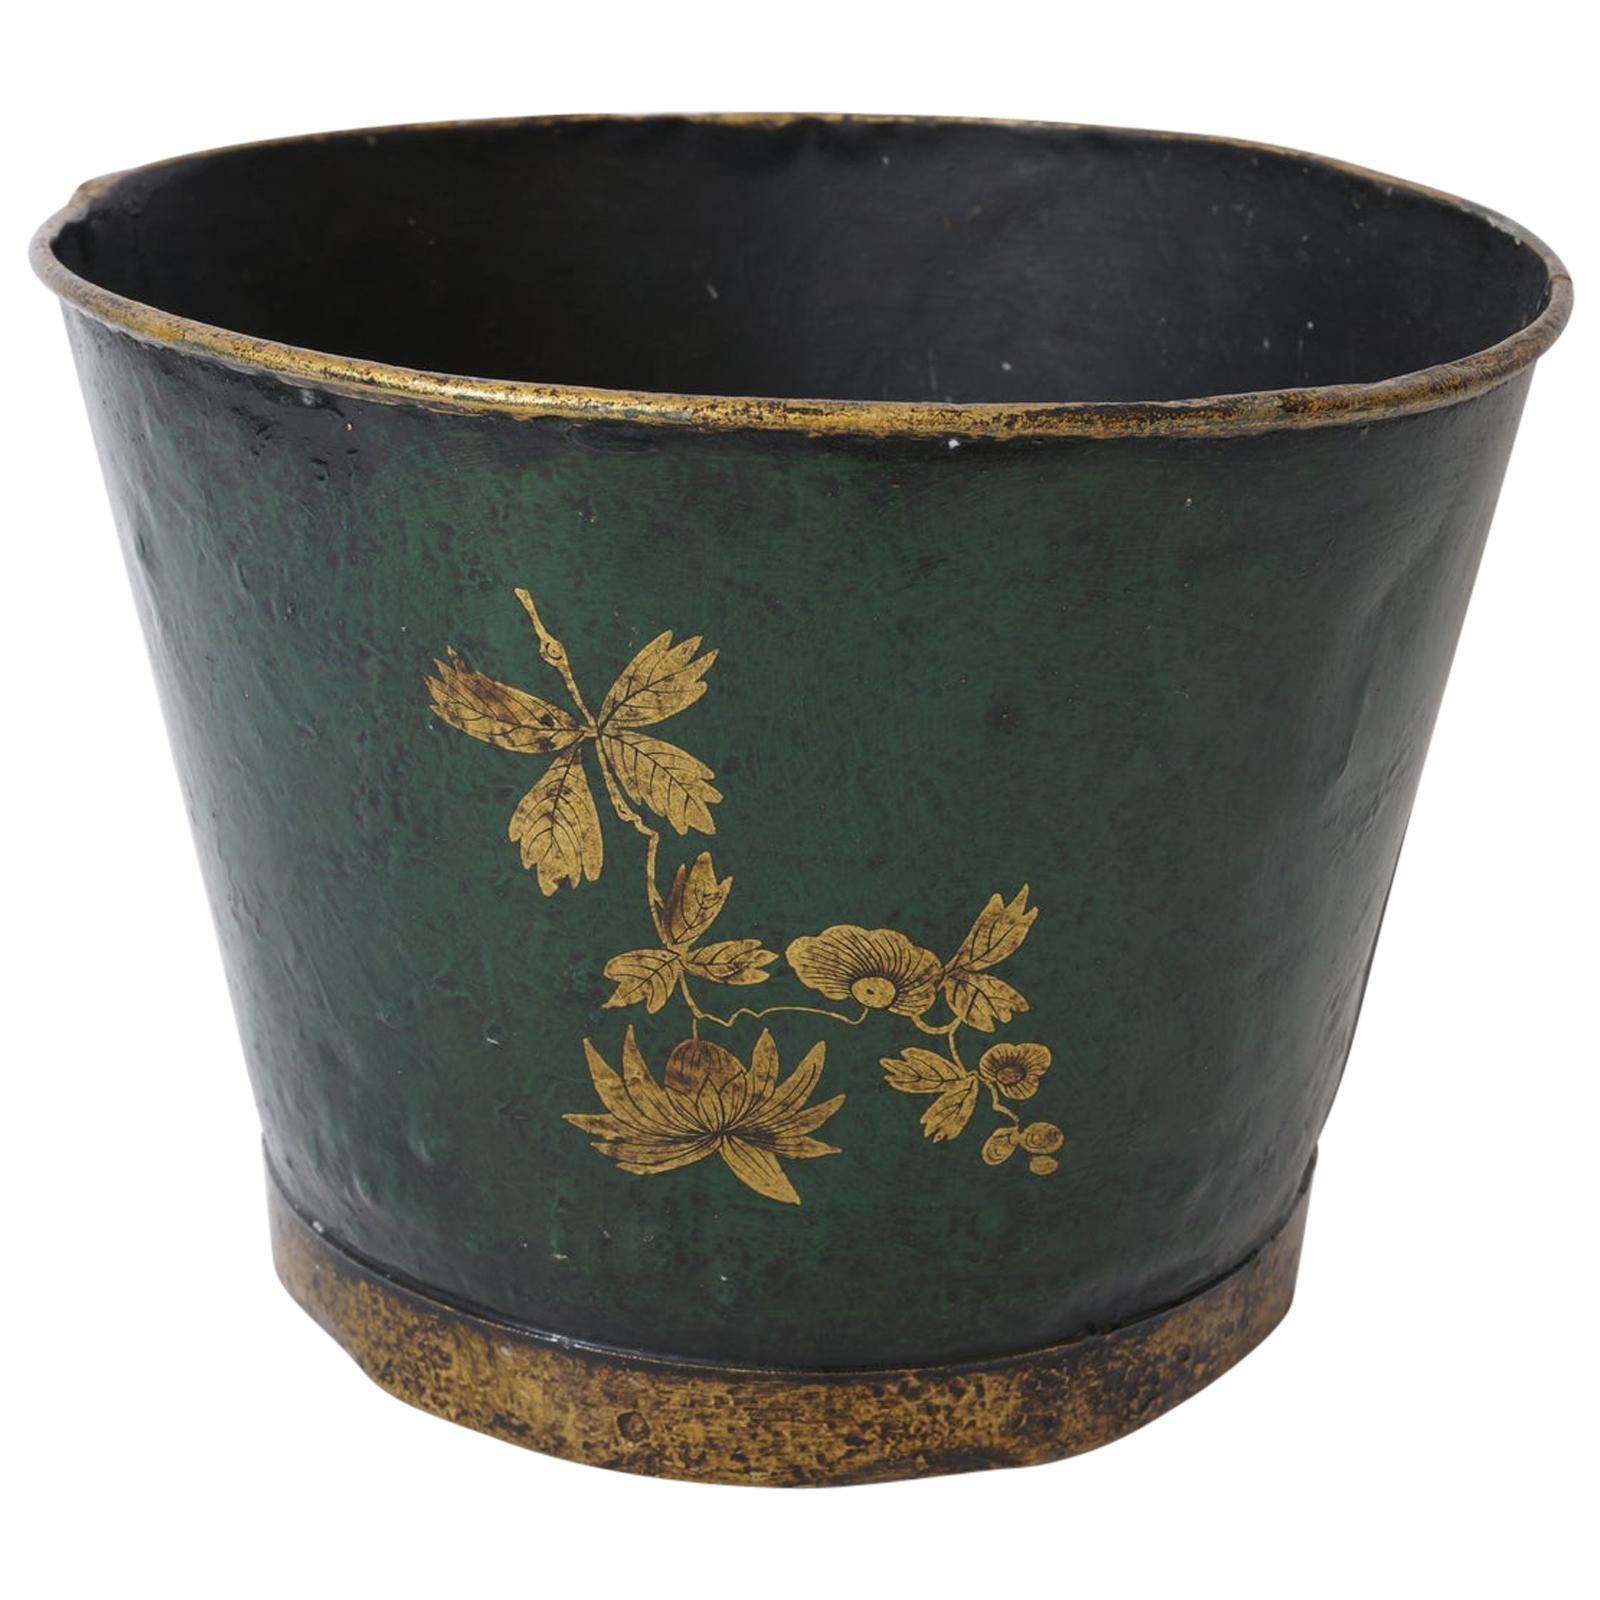 English Toleware Bucket with Butterfles